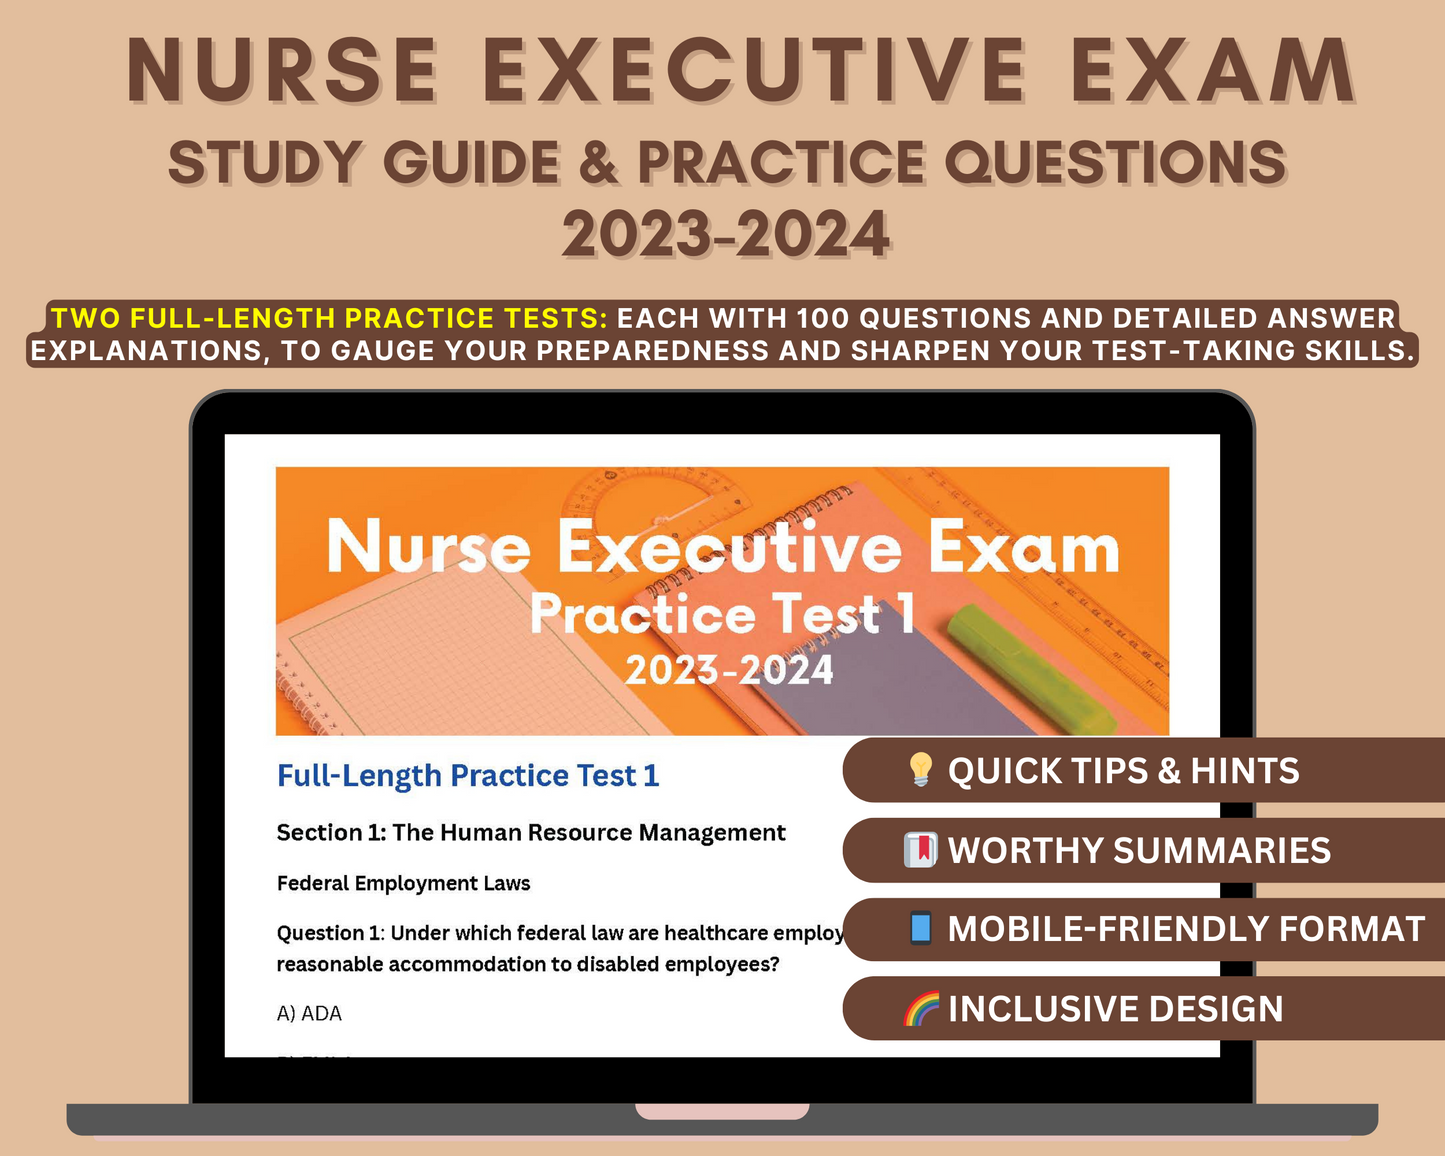 Nurse Executive Exam Study Guide 2023-2024: ANCC Certification Prep with In-Depth Content Review, and Practice Tests